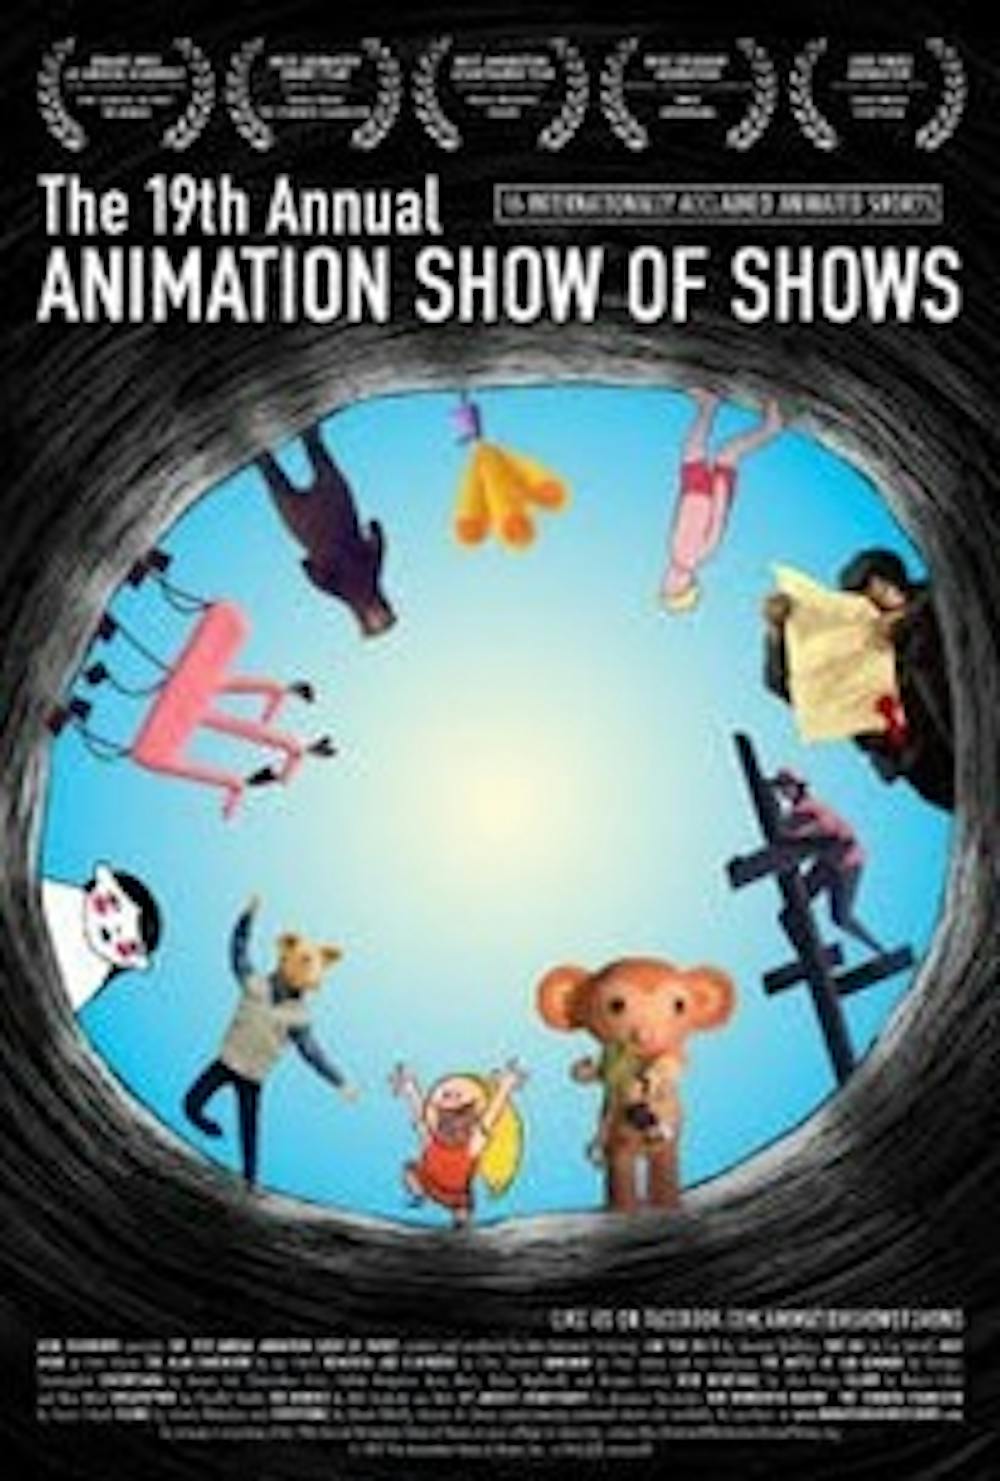 <p>The 19th Annual Animation Show of Shows brought creative fun to the Violet Crown.</p>